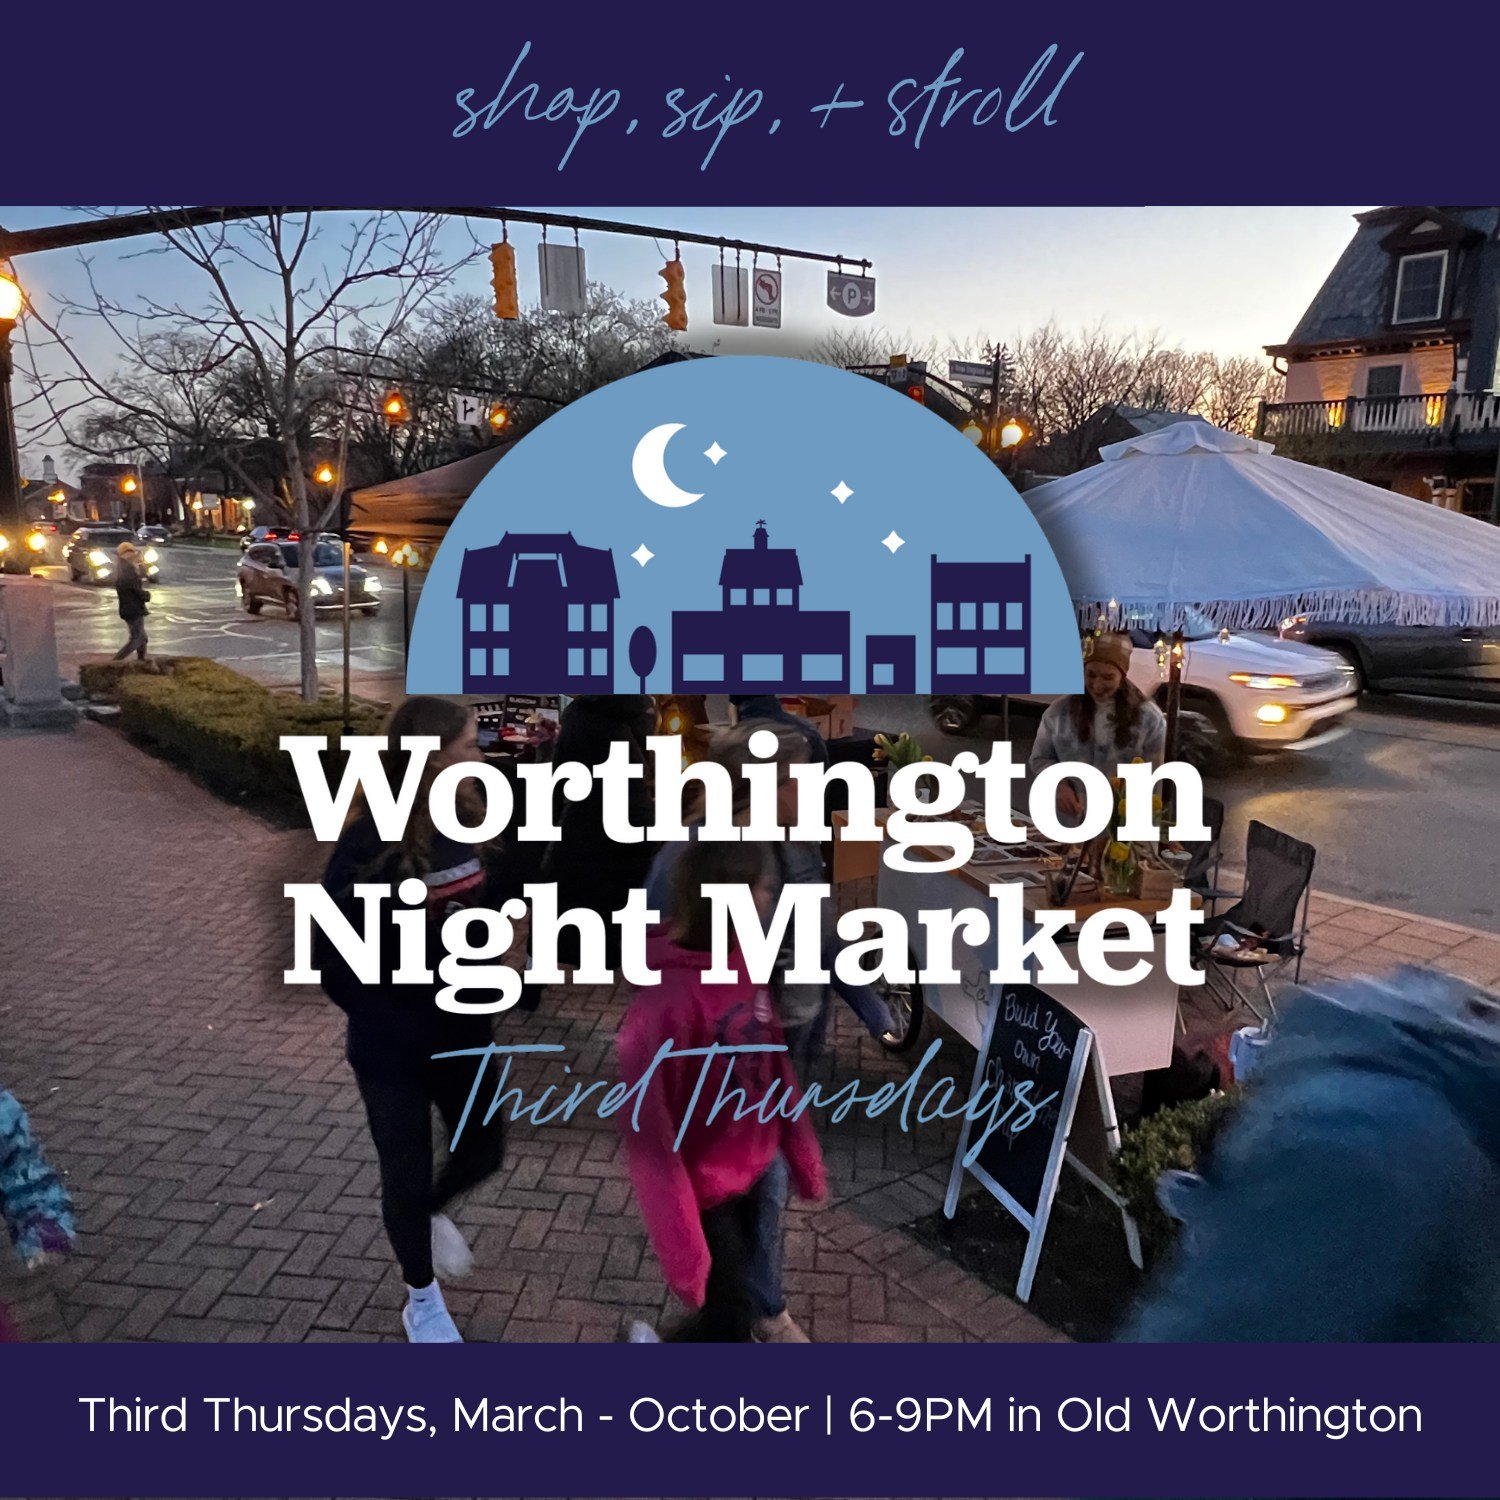 Our next Third Thursdays Night Market is coming up on Thursday, May 16 from 6-9PM throughout Old Worthington. Our vendor line up is HOPPING with so many great merchants!

We are happy to welcome @iglooletterpress @underworld.feast @pawsondogtreatco @